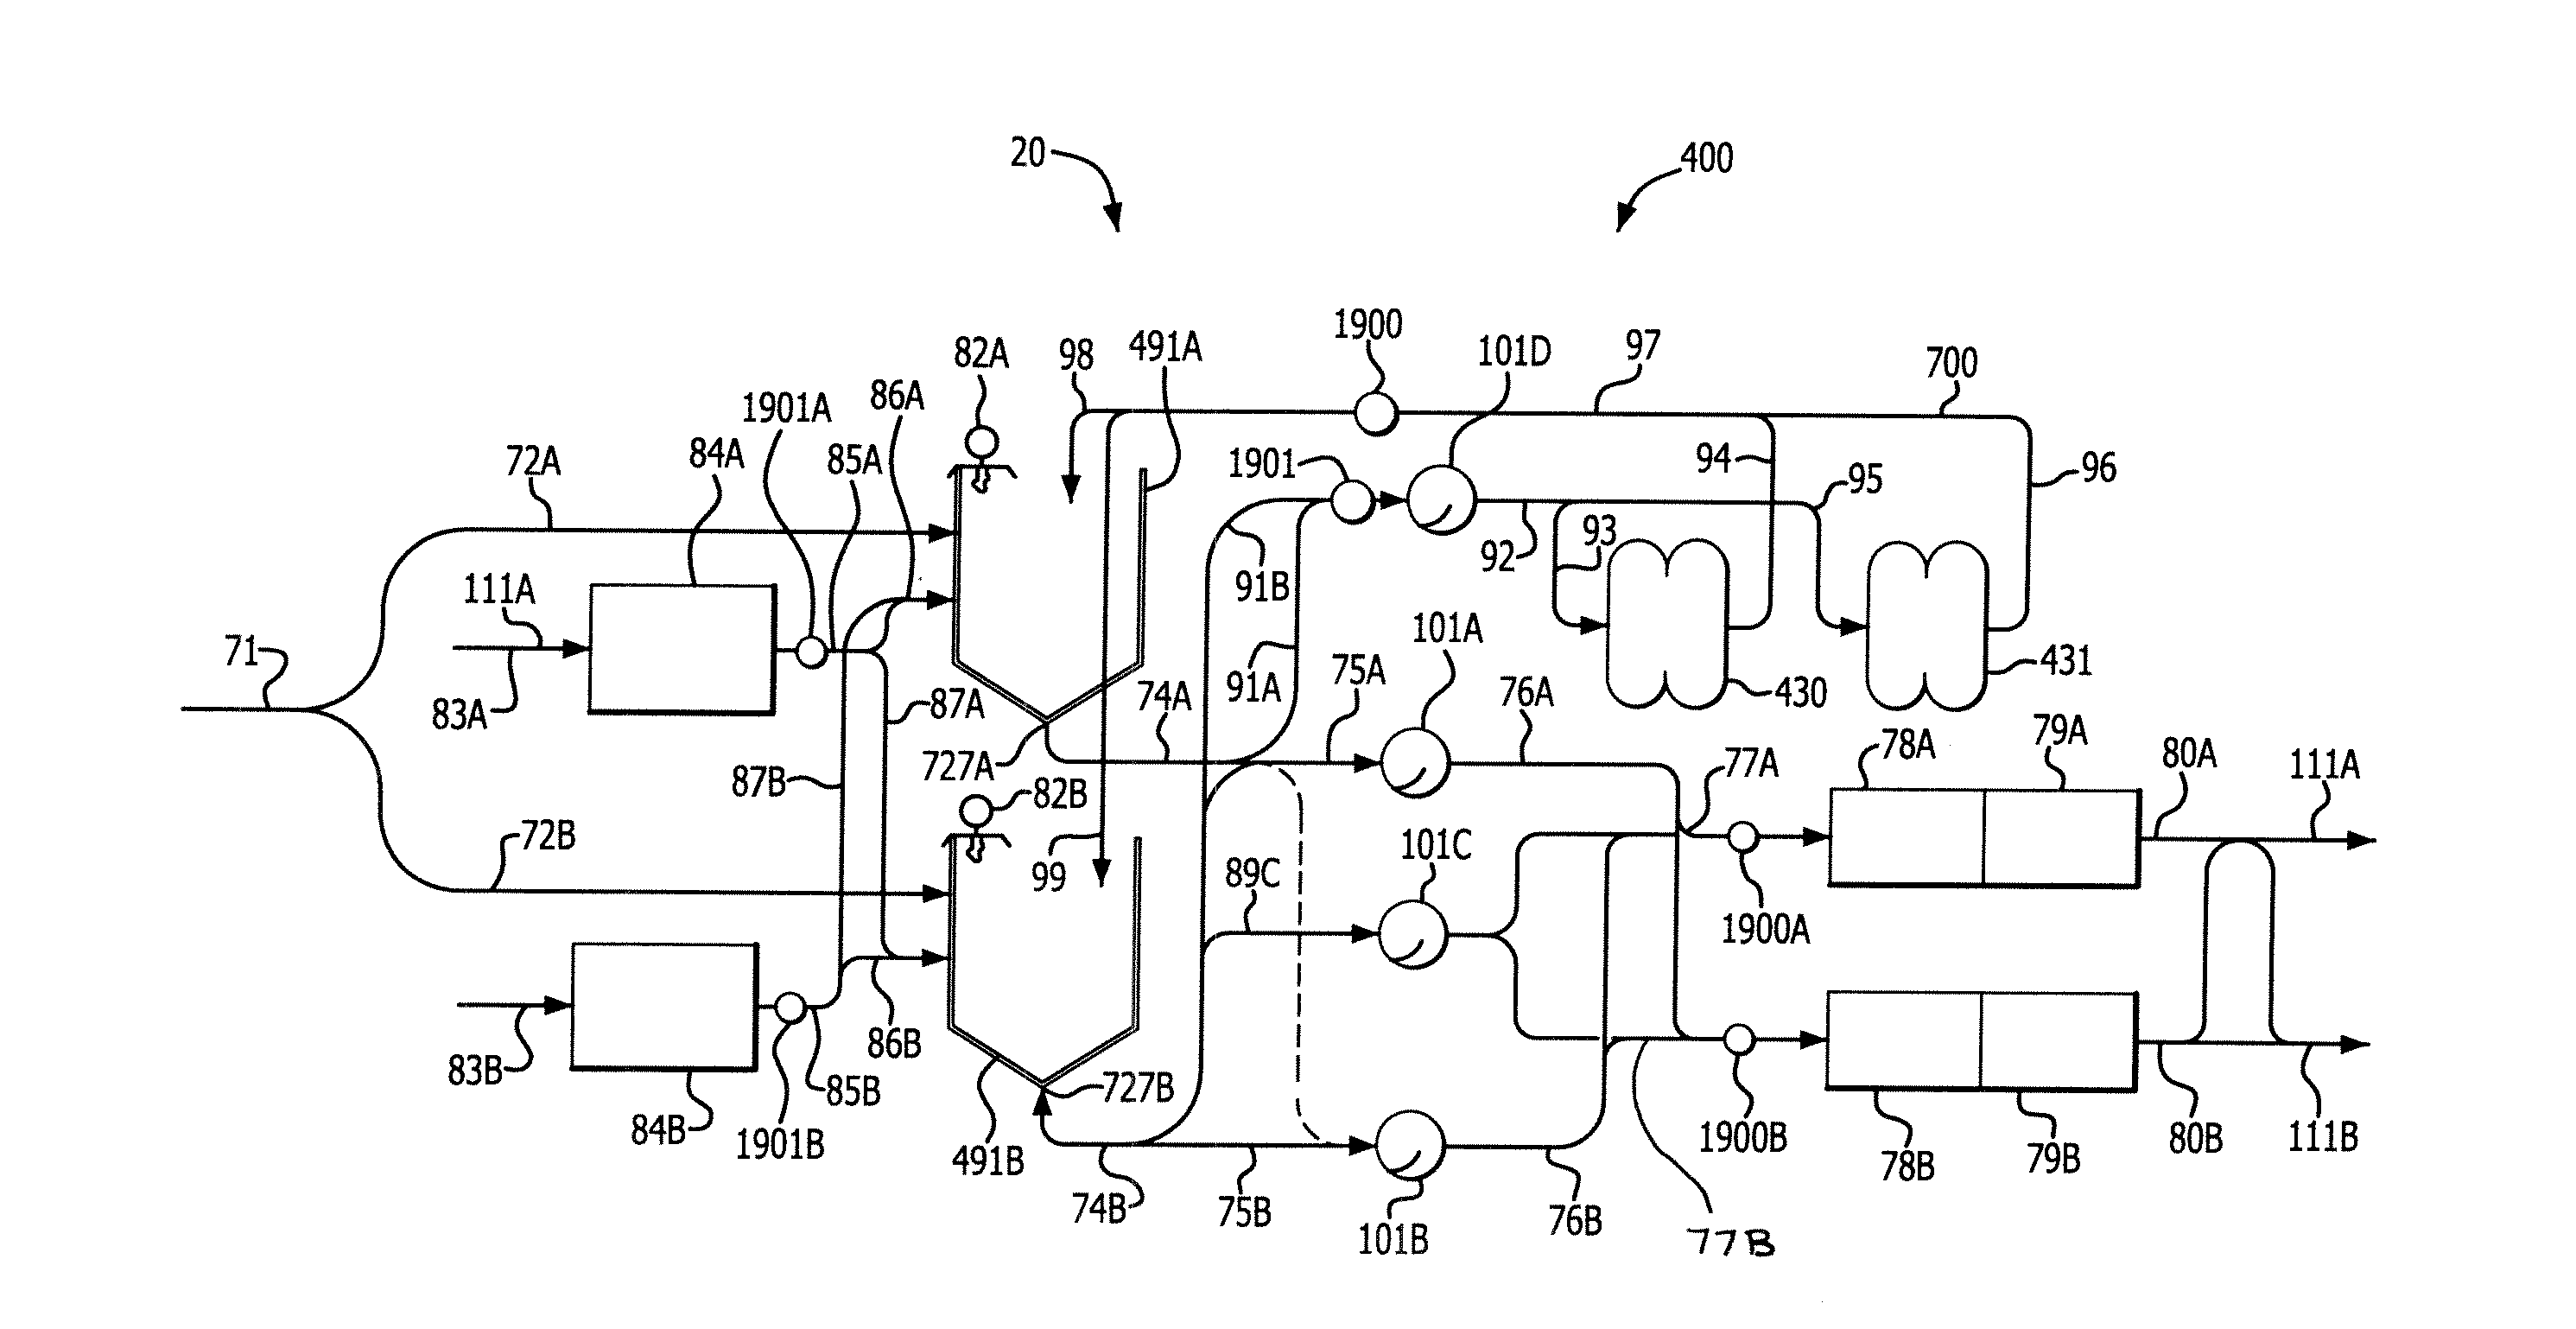 Slurry Supply and/or Chemical Blend Supply Apparatuses, Processes, Methods of Use and Methods of Manufacture